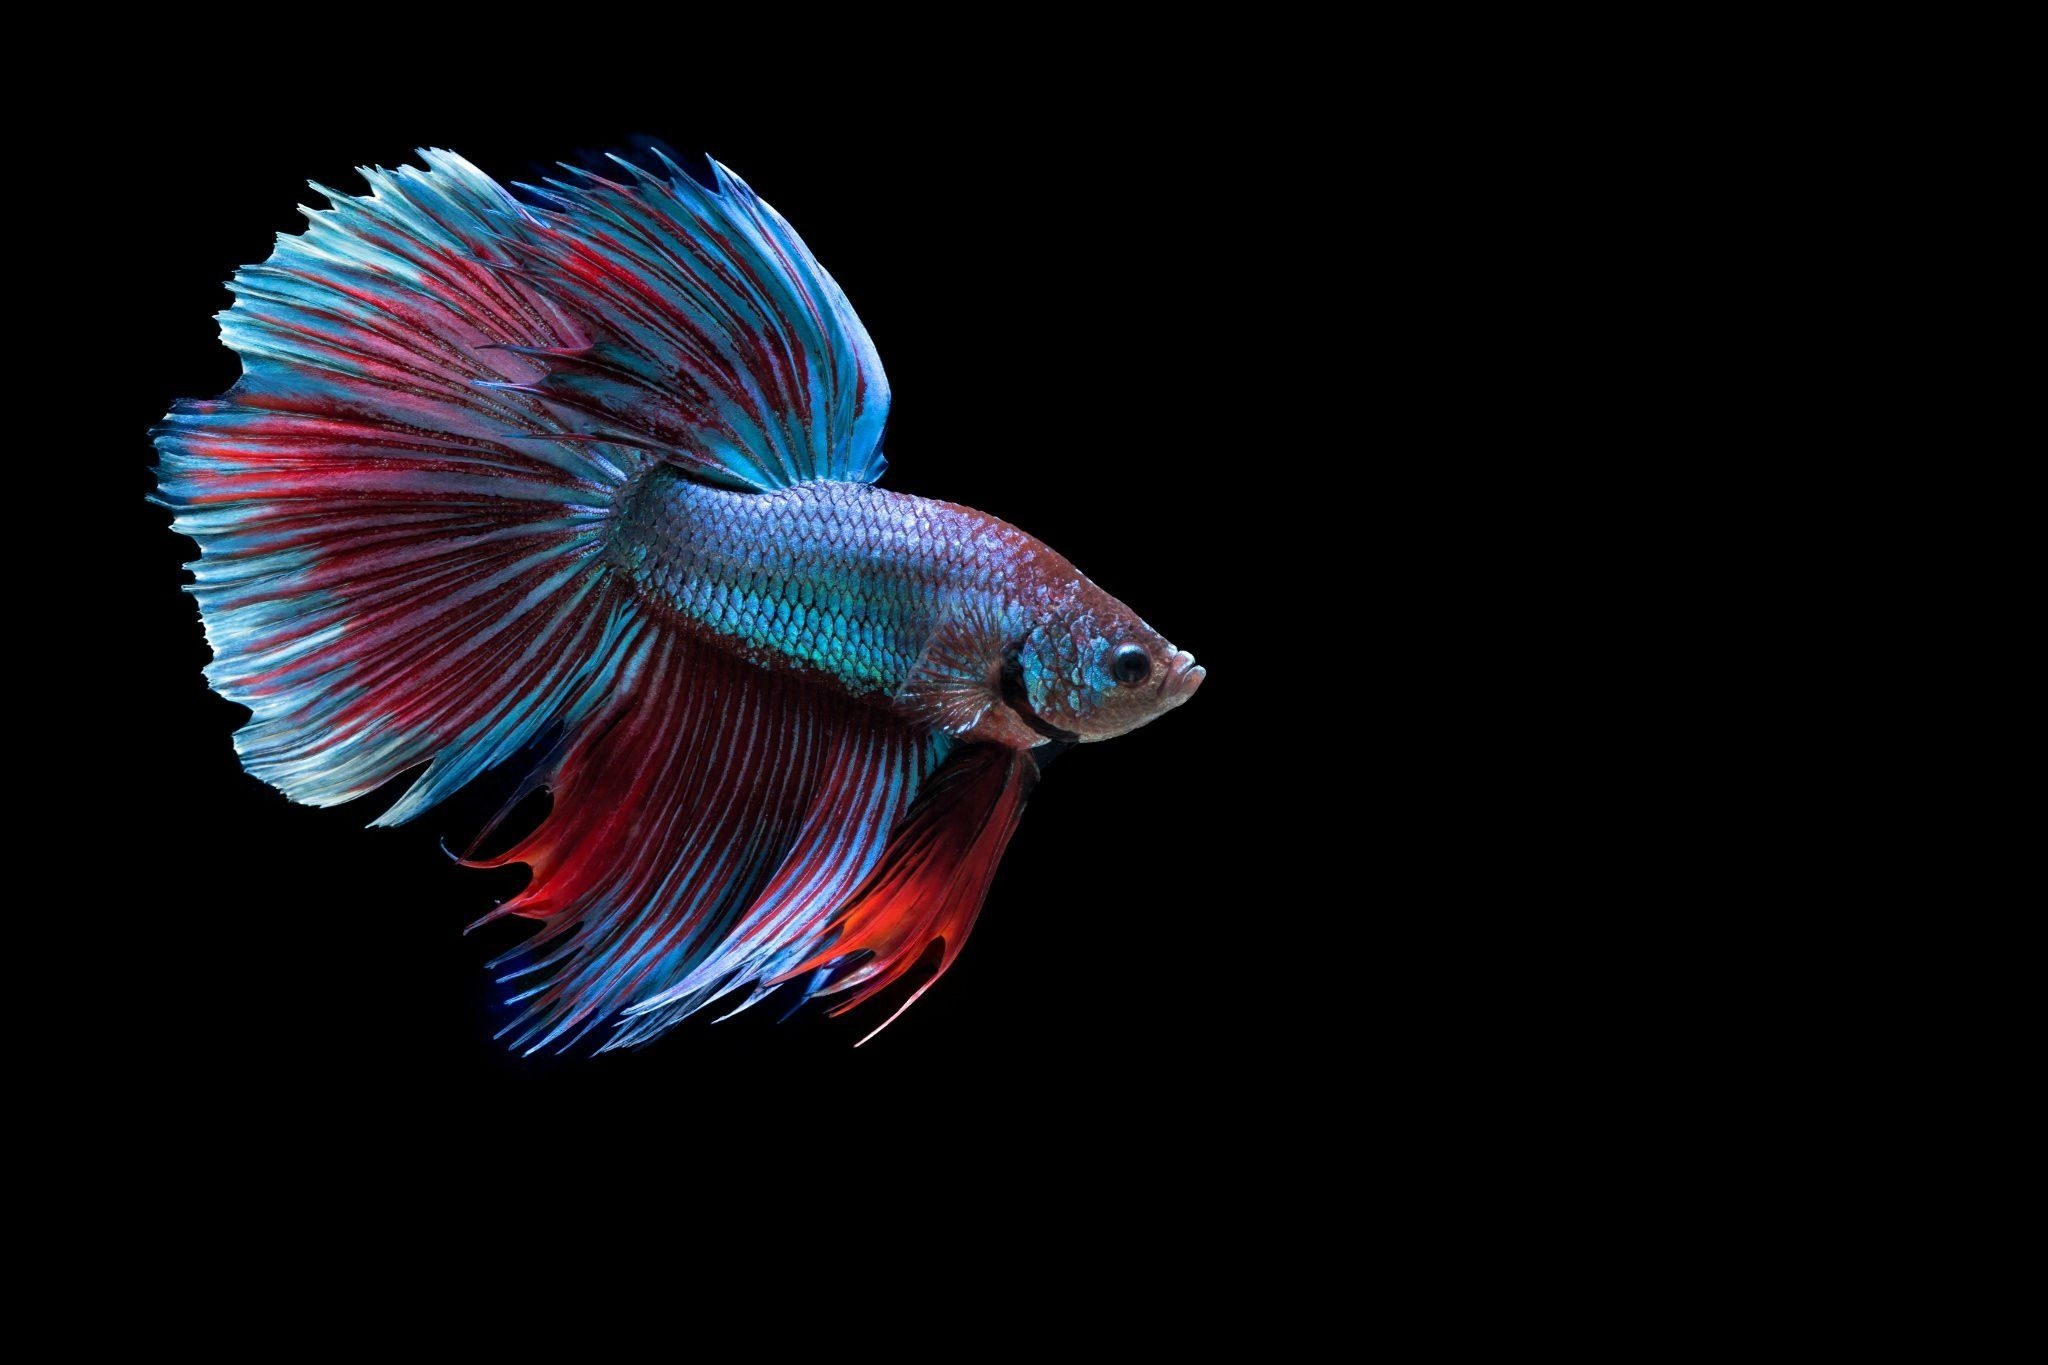 Betta wallpapers collection, Elegance and grace, Colorful Siamese fighting fish, Captivating aquatic photography, 2050x1370 HD Desktop